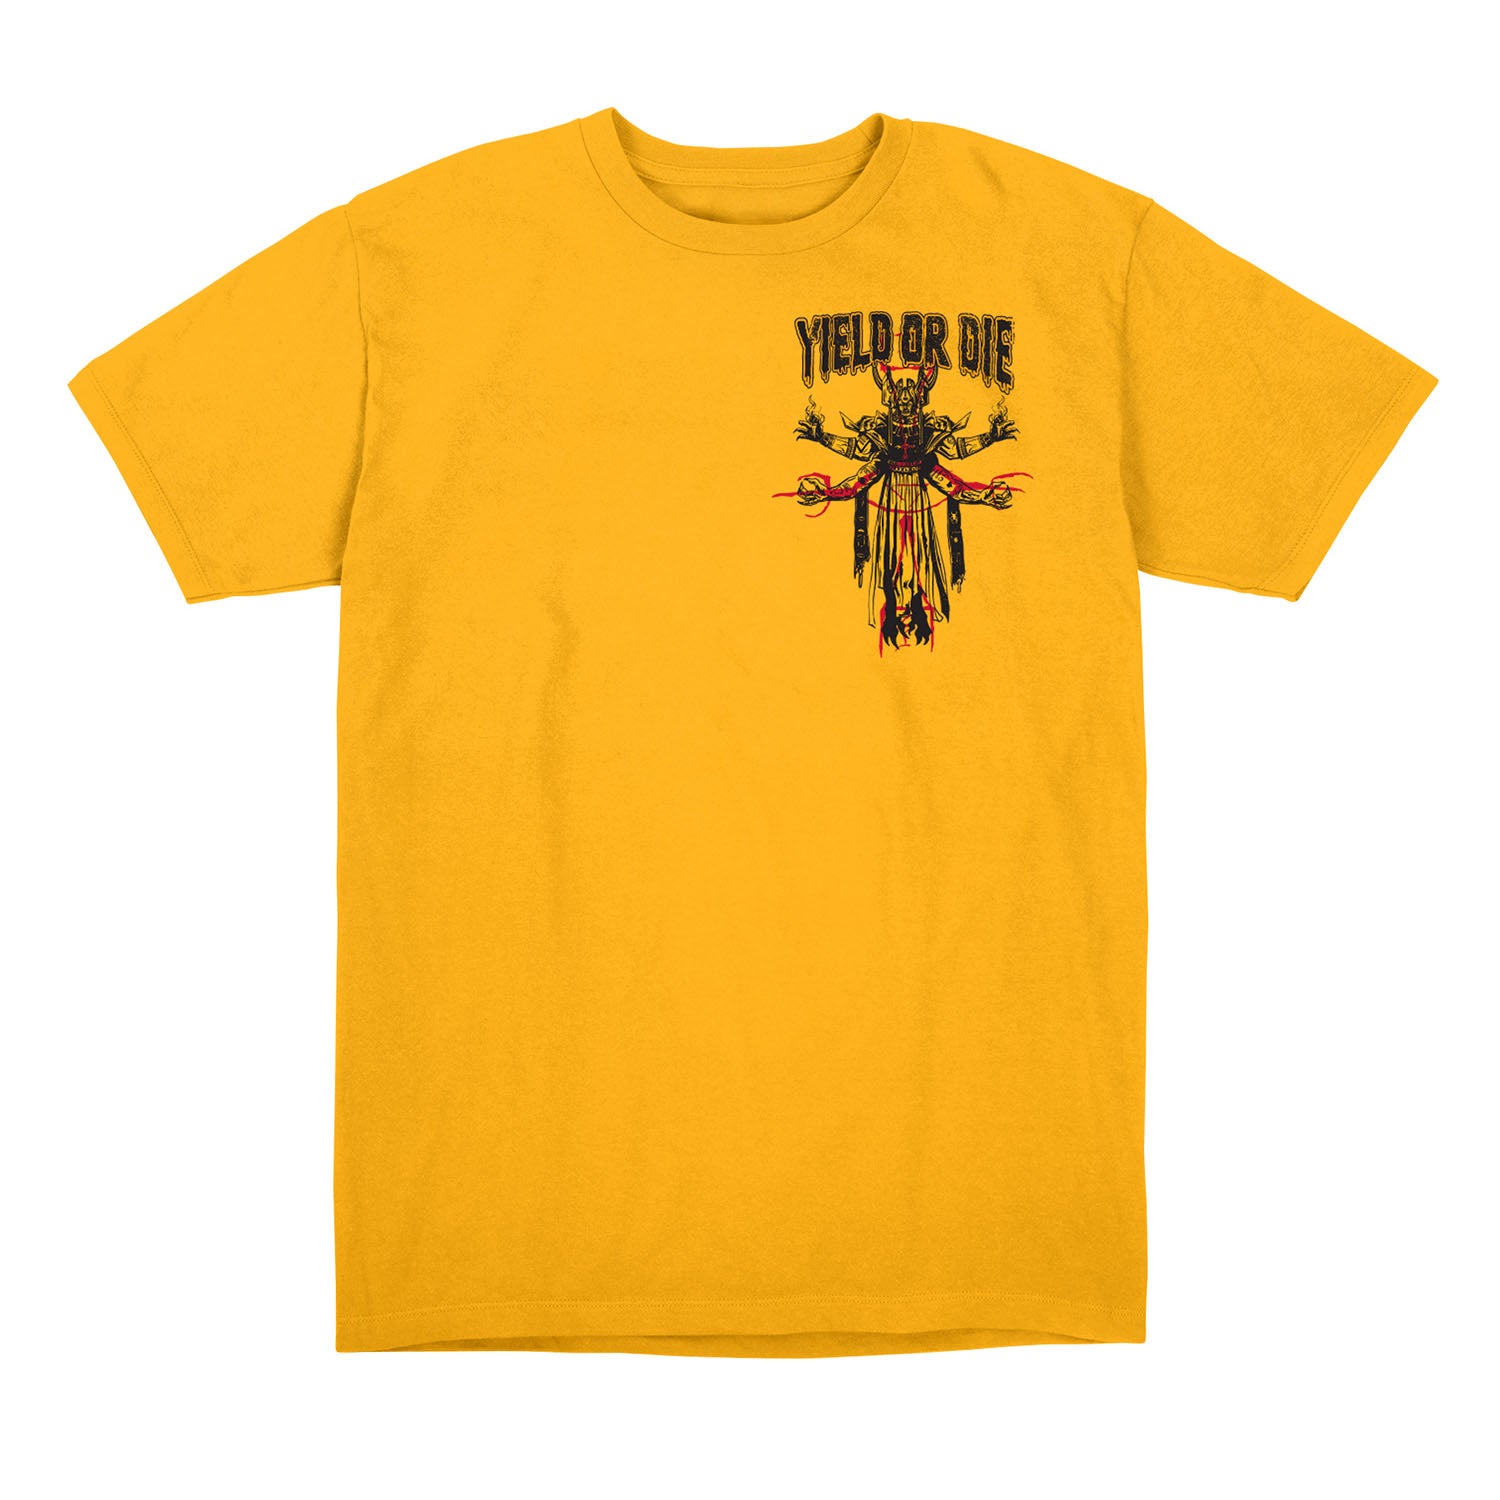 Call of Duty Kortifex Yield or Die Gold T-Shirt - Front View